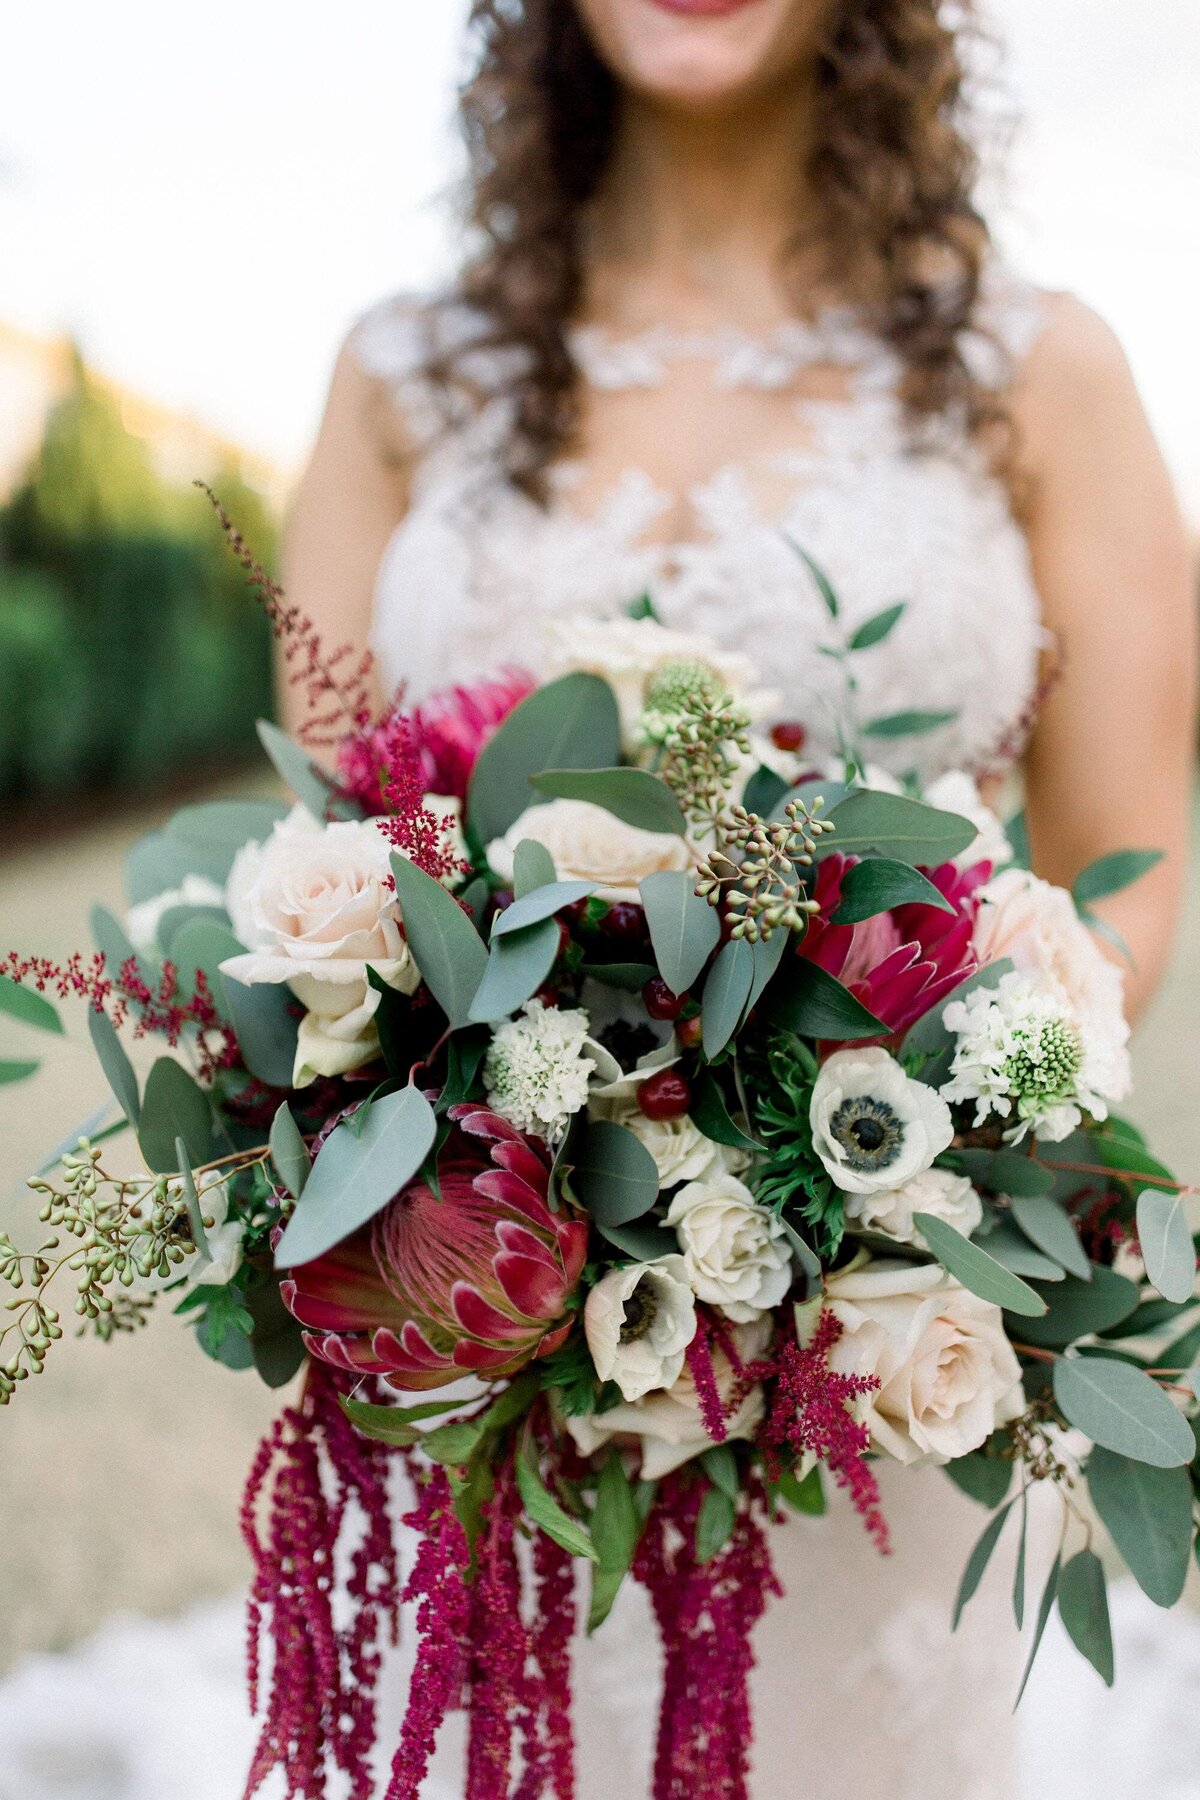 Large bridal bouquet with red protea, anemone, hanging amaranthus, white rose, and mixed eucalyptus greenery